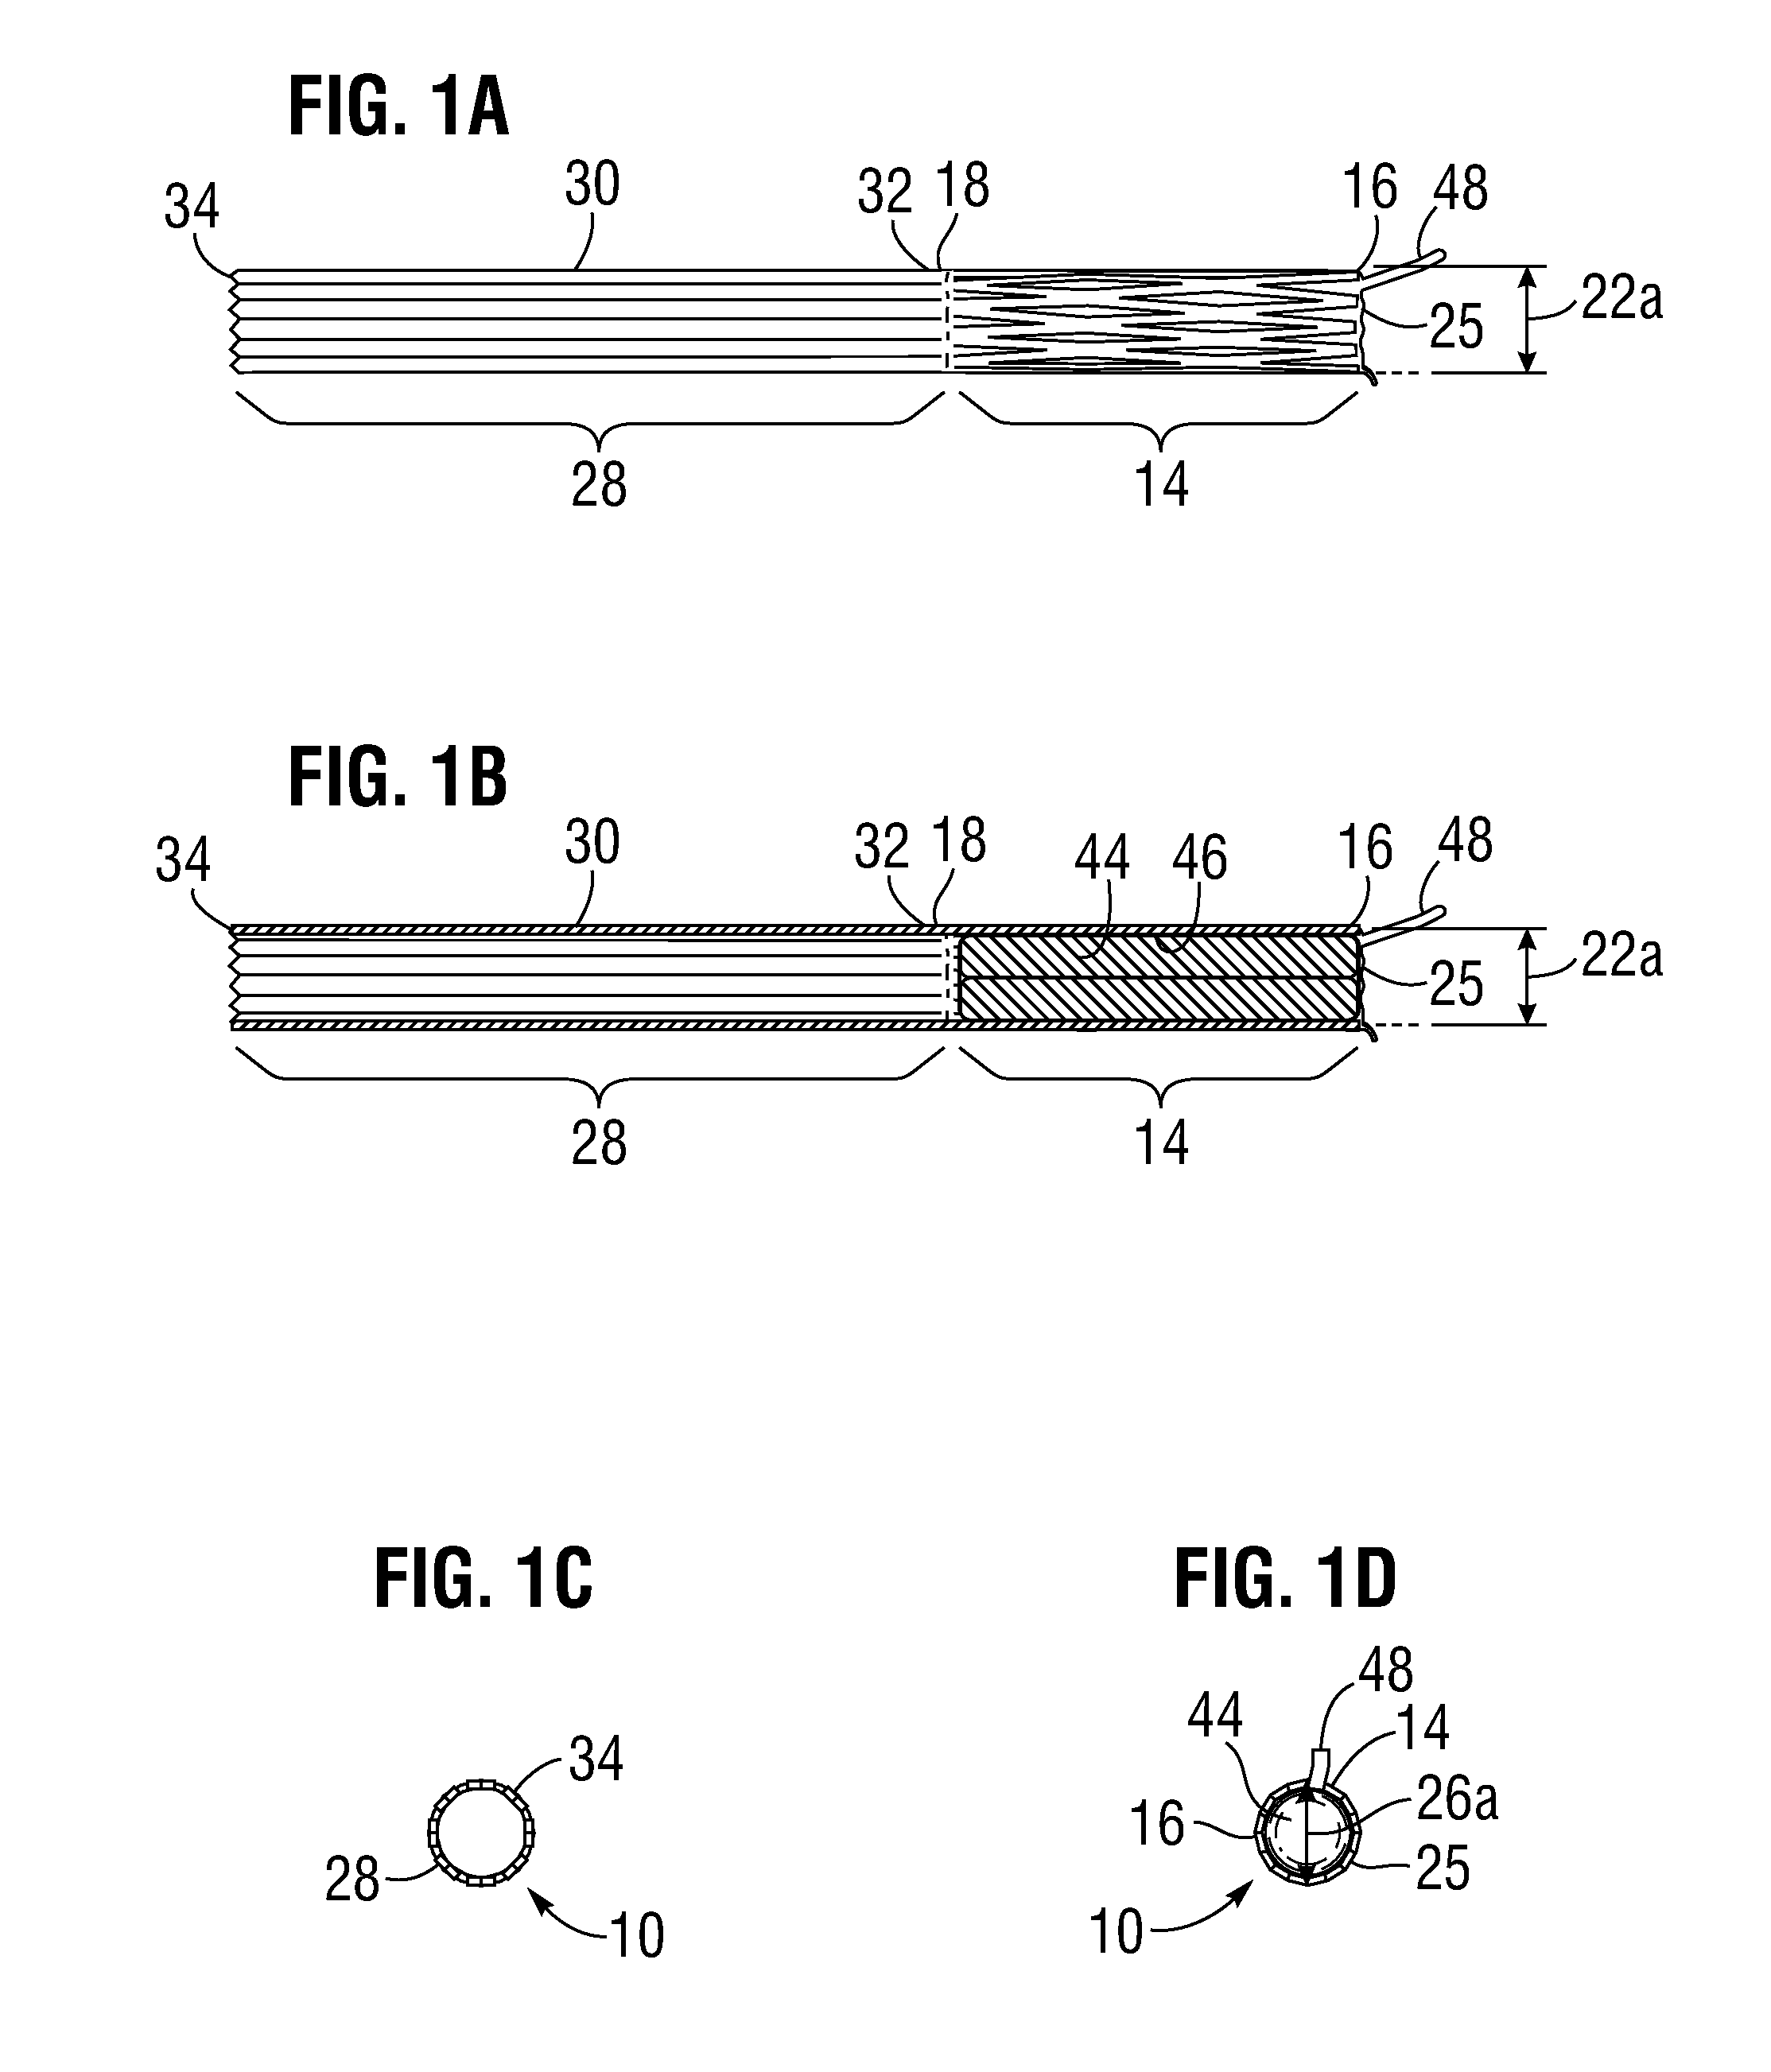 Apical puncture access and closure system